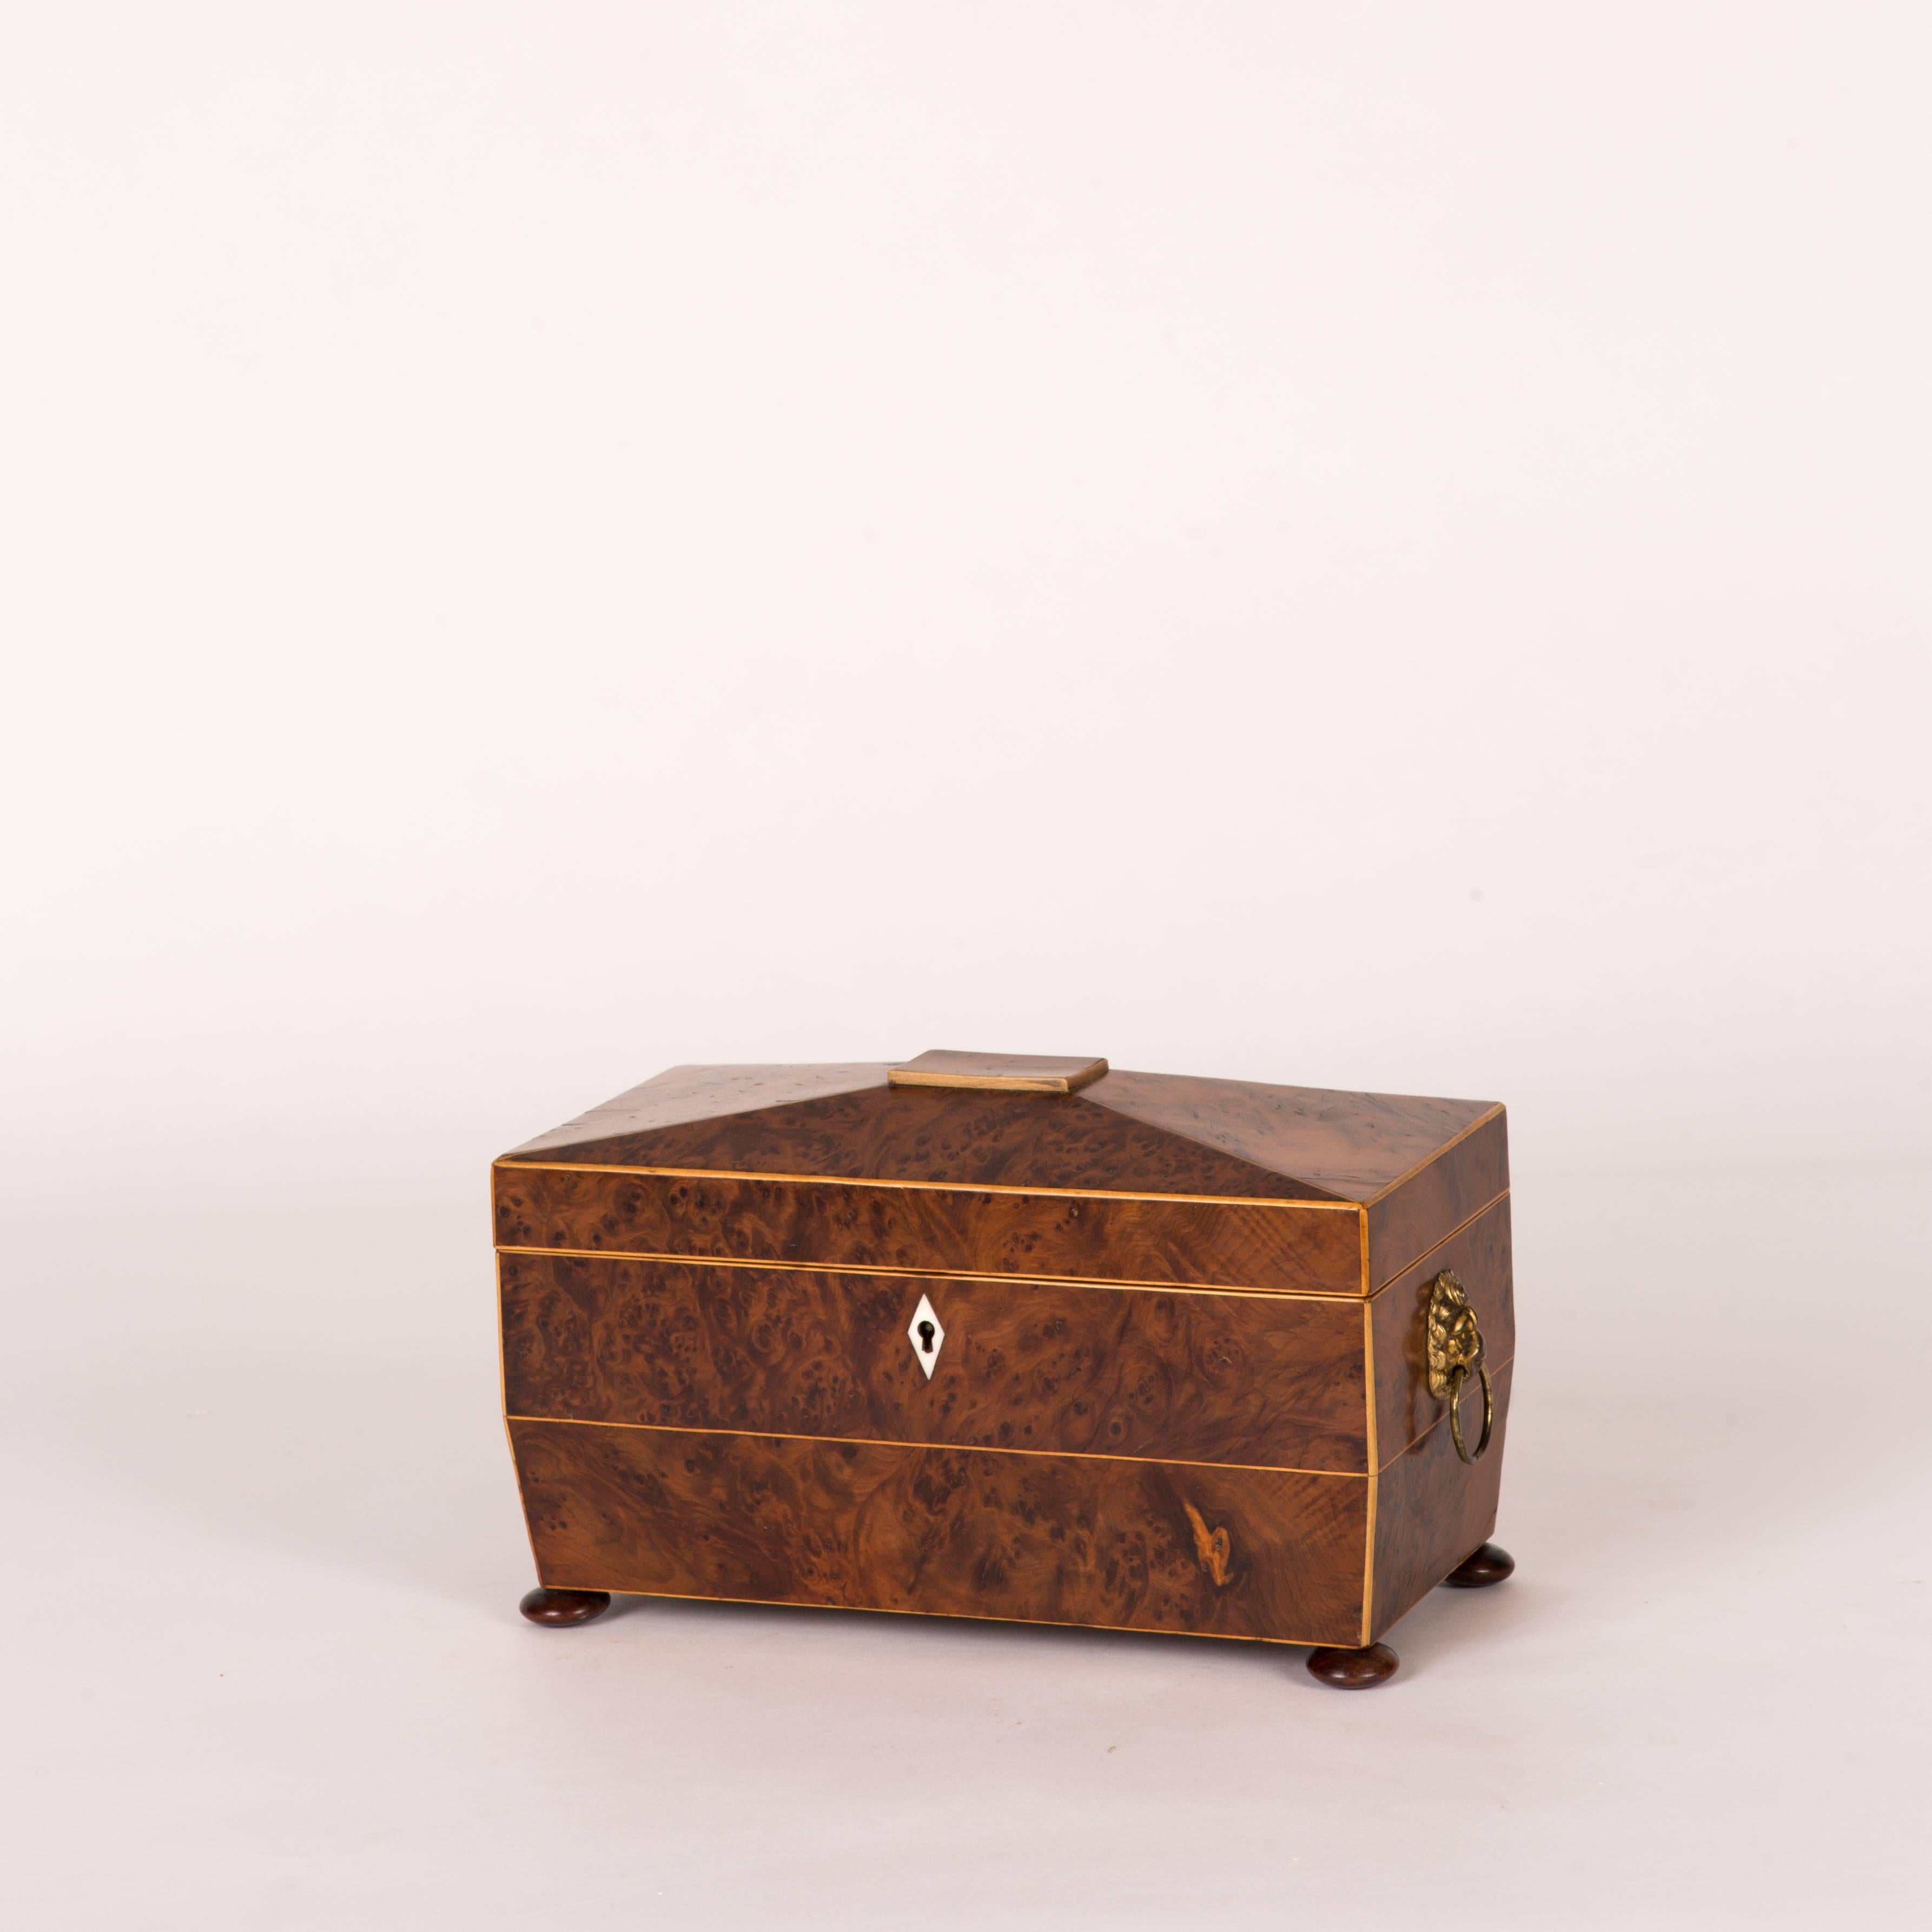 Late 19th century yew wood tea caddy box from England on round feet. Box has three compartments: two rectangular storage spaces with flip open tops and one circular opening with red velvet base. 